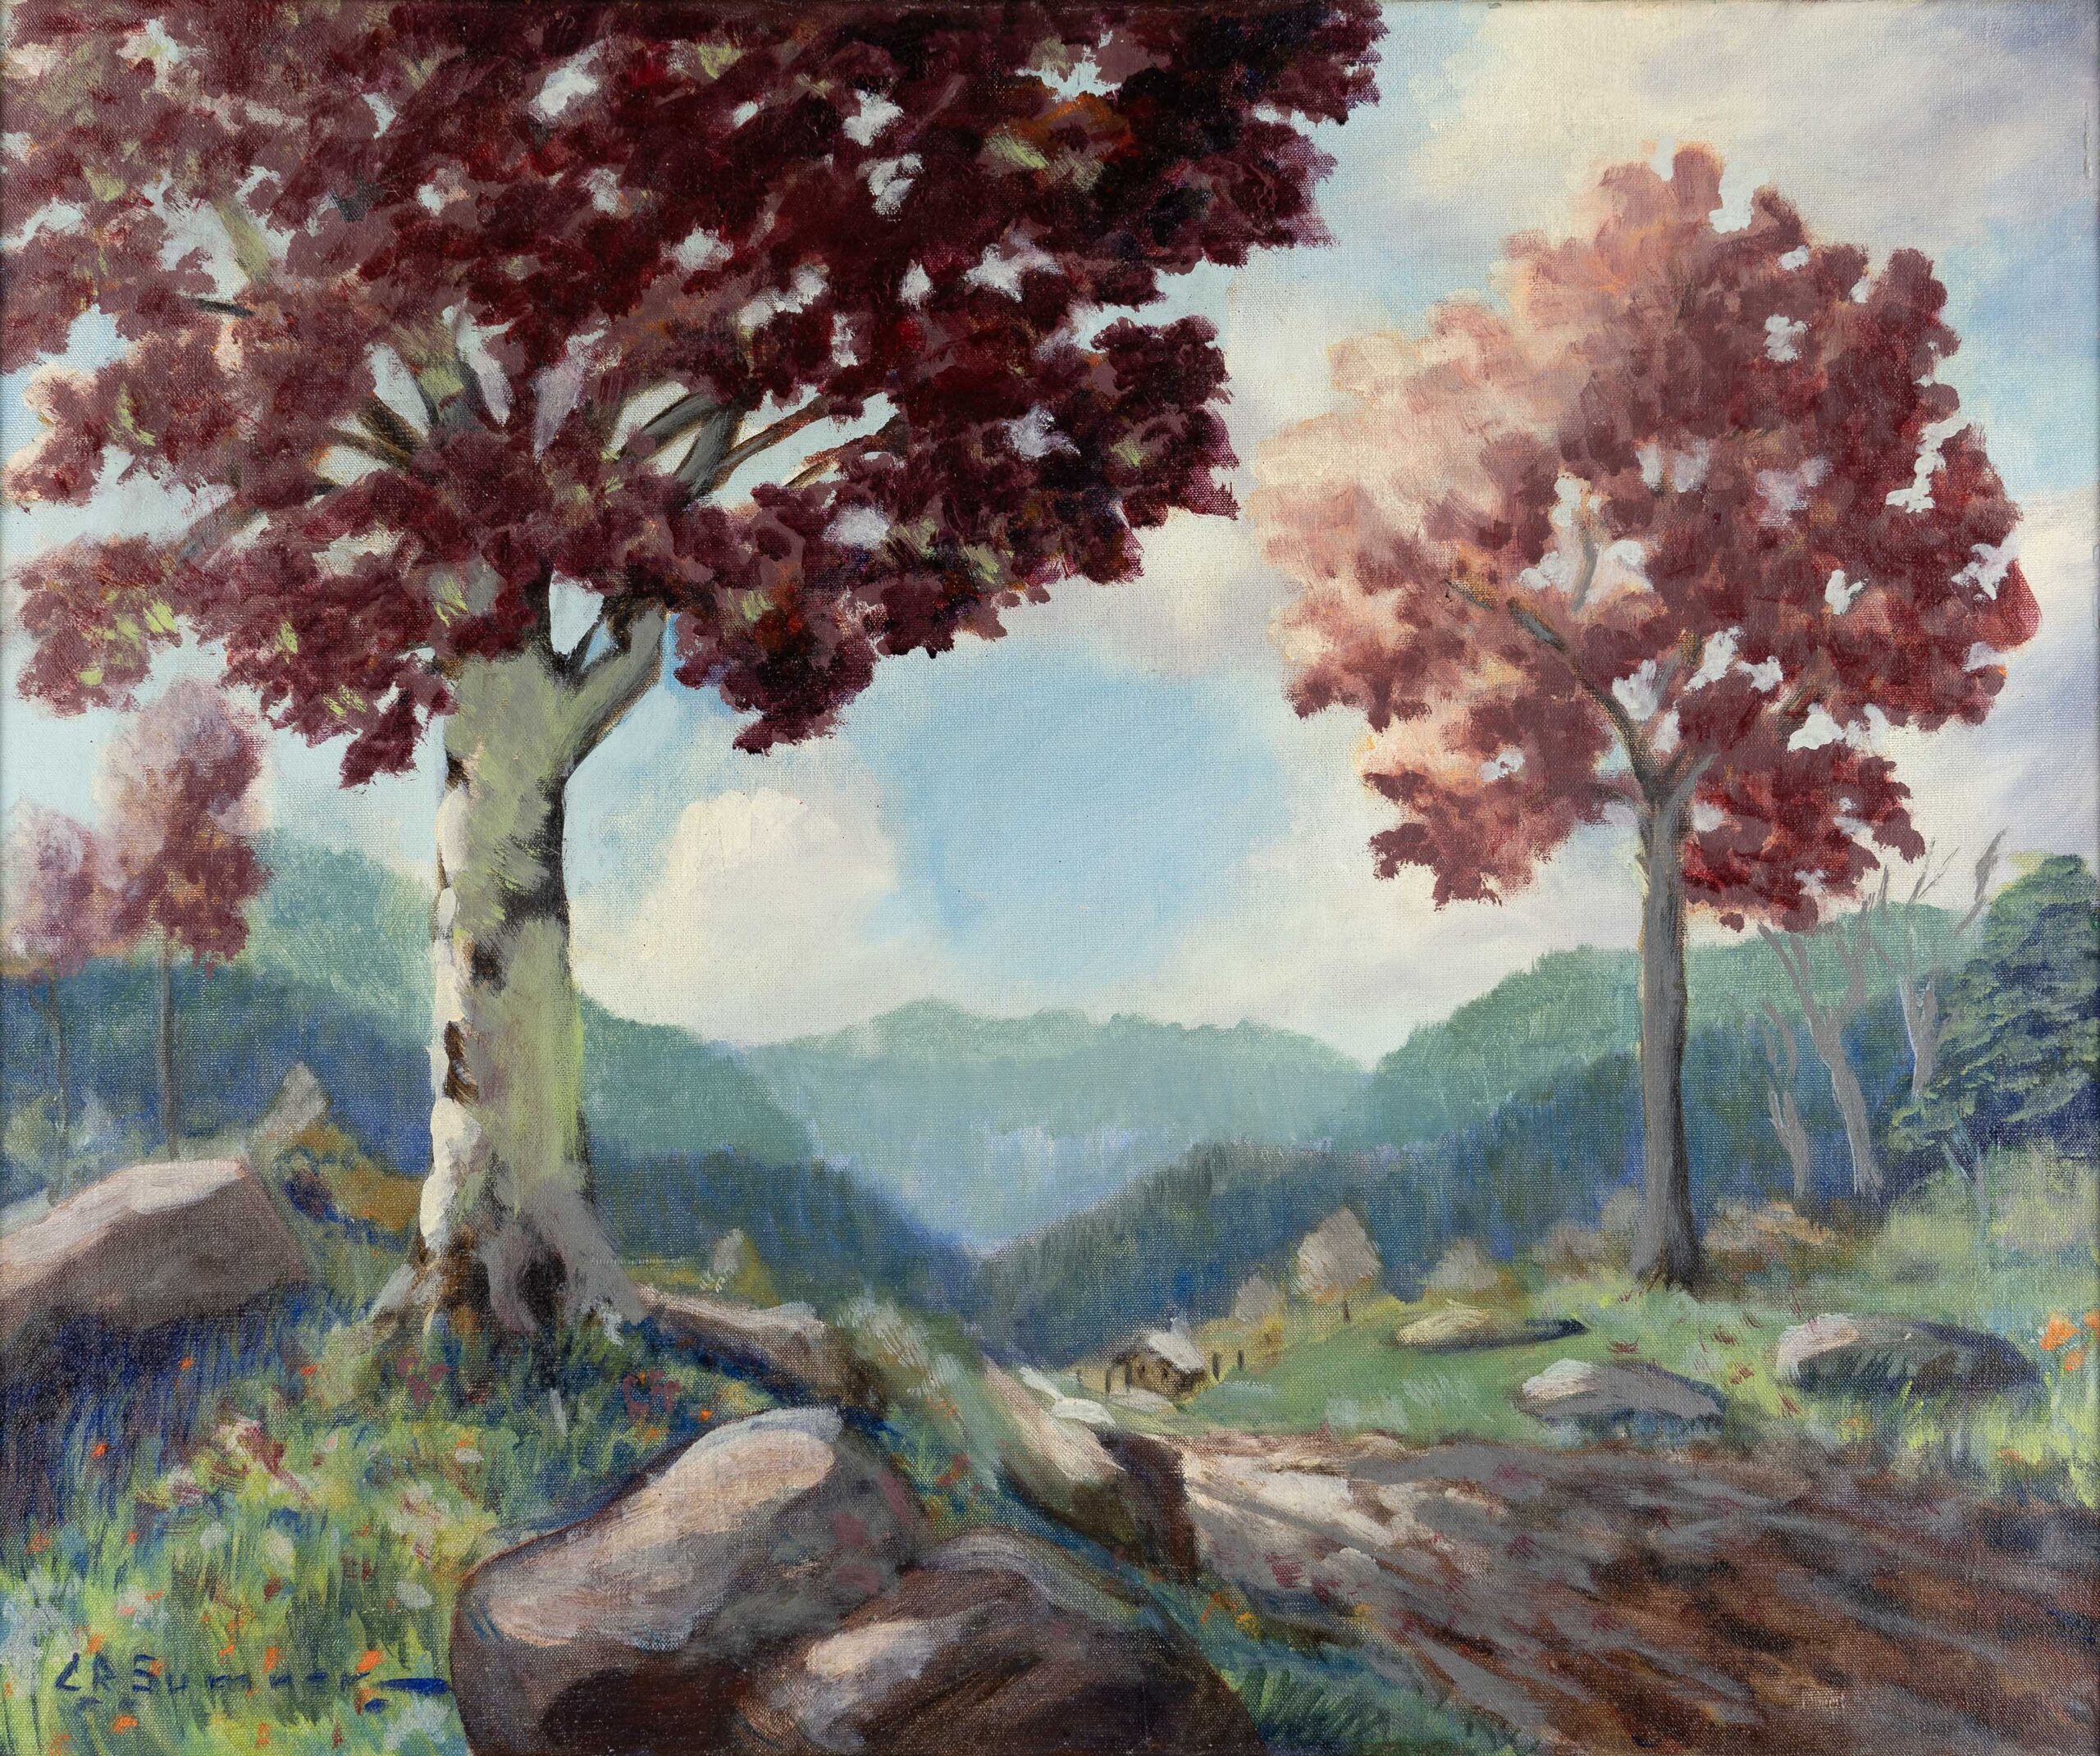 Clarence R. Sumner, "Red Maple," not dated, oil on canvas